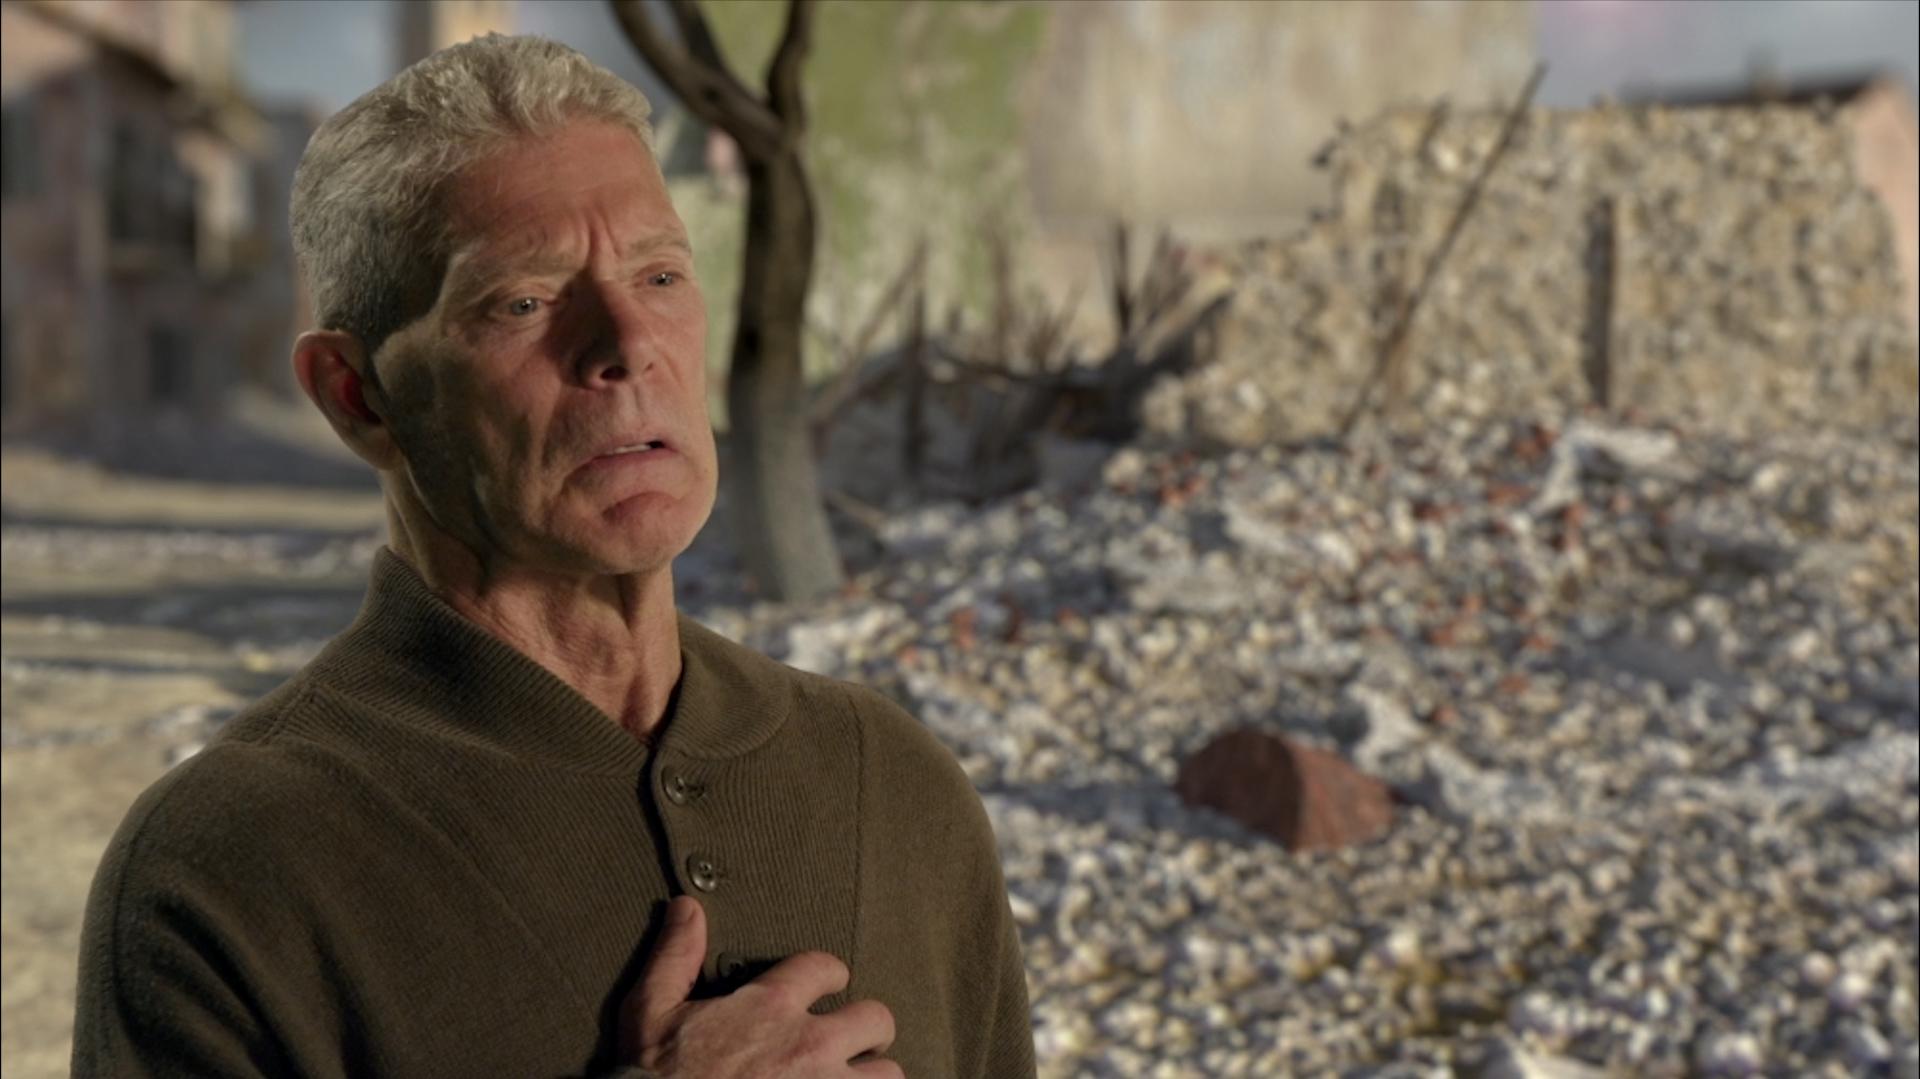 Actor Stephen Lang Shares How An Indie Project Led To A Hollywood